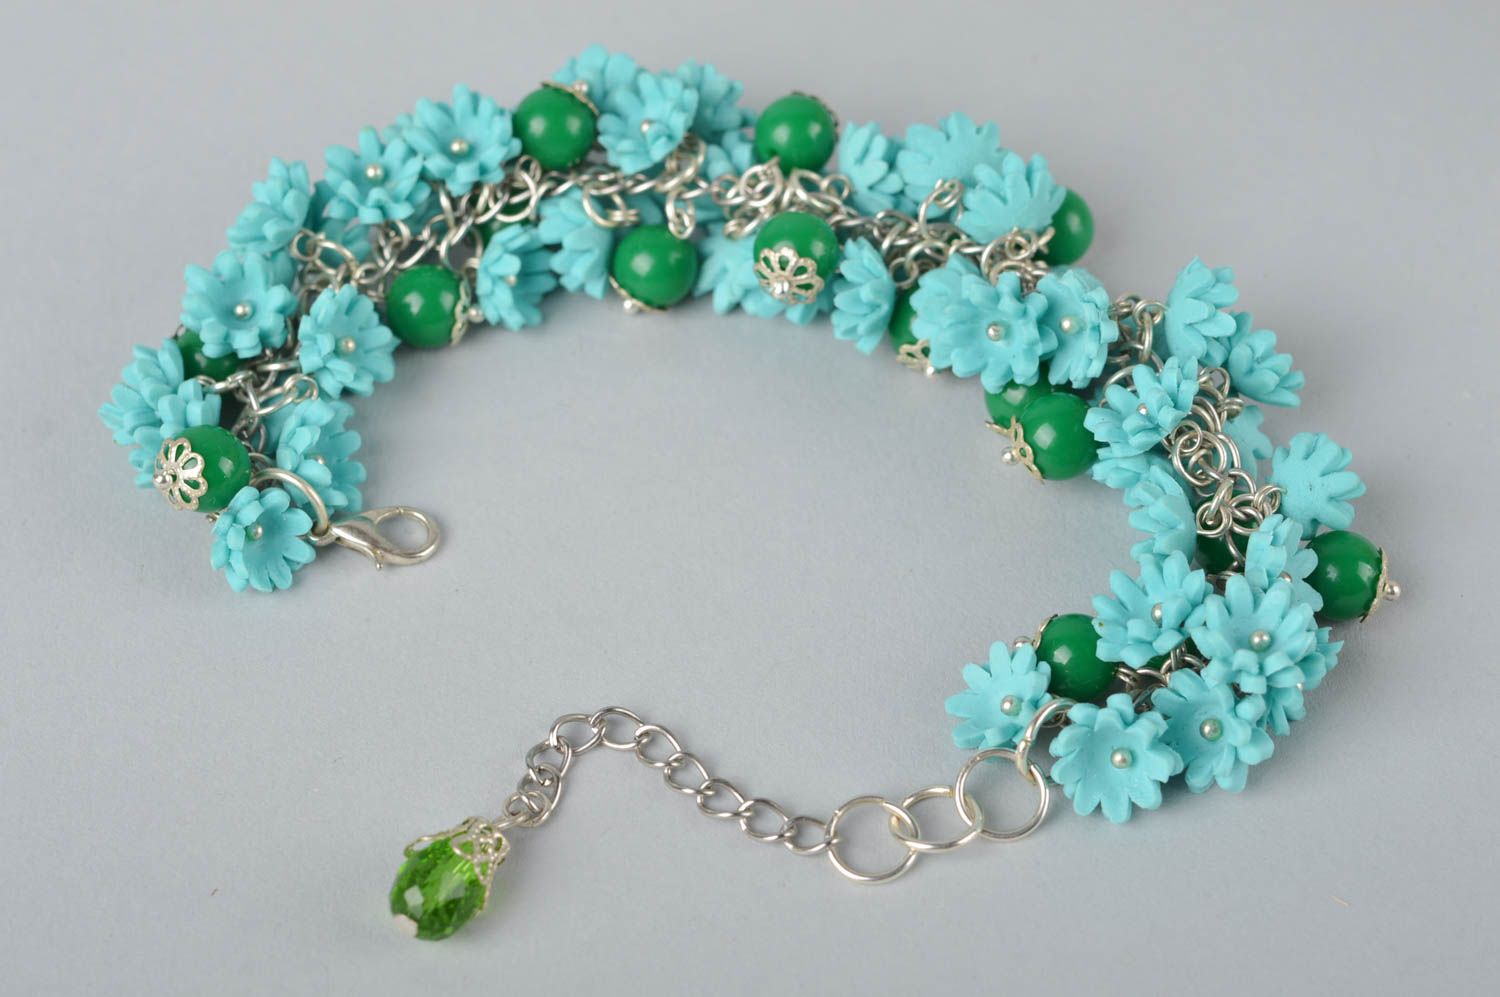 Turquoise flowers charm bracelet for women personalized photo 2